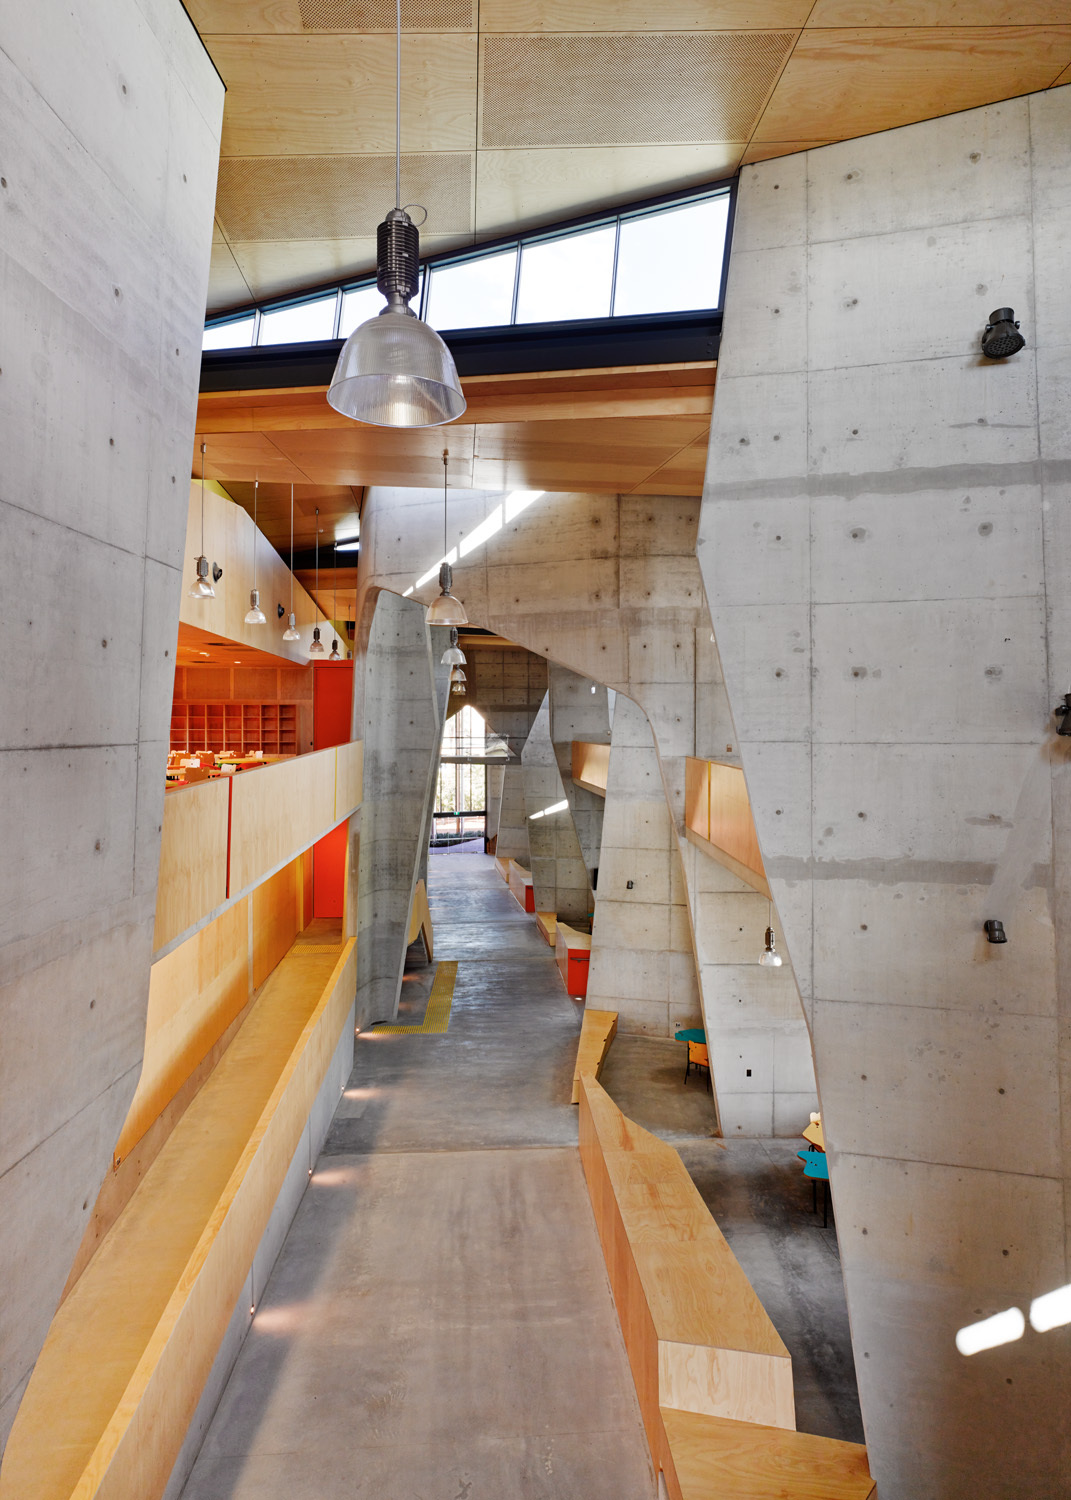 New Australian School Of Architecture Is A Crazy Canyon Of Concrete And Wood